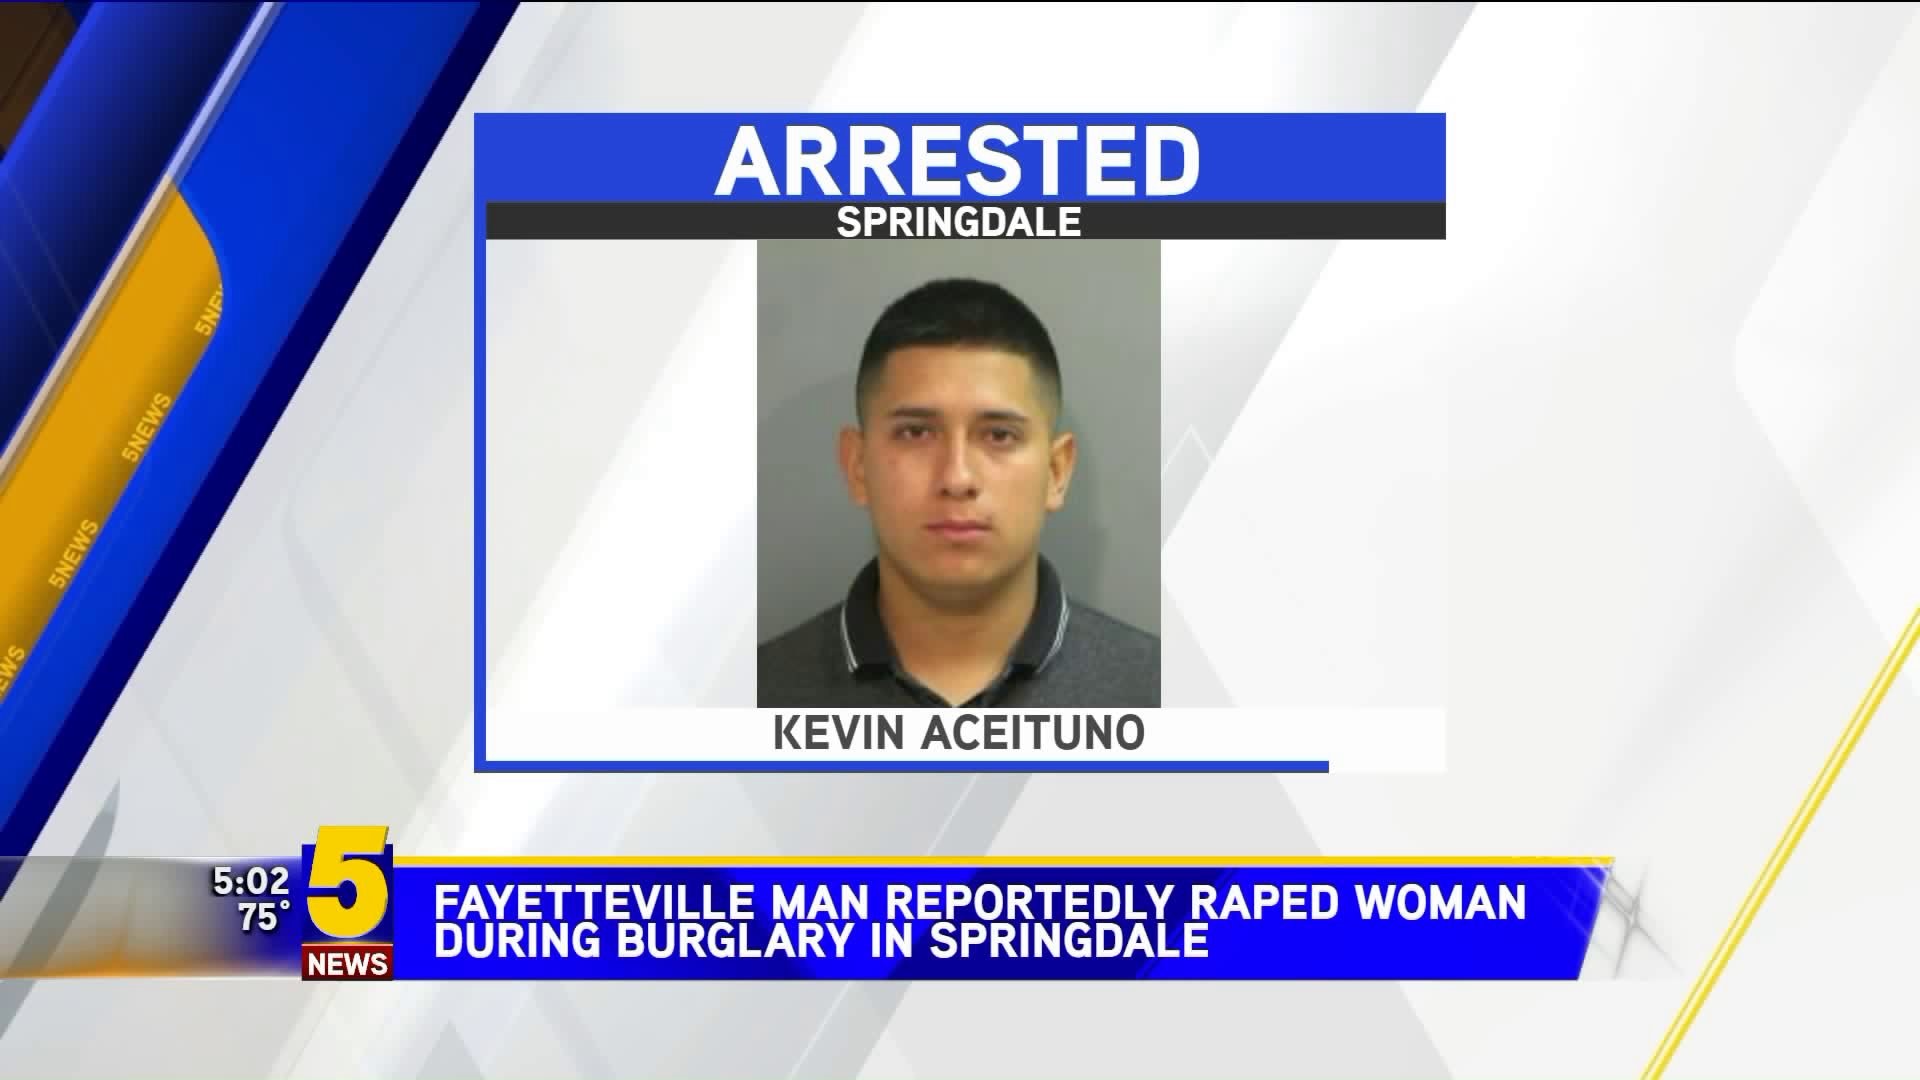 Fayetteville Man Reportedly Raped Woman During Burglary in Springdale